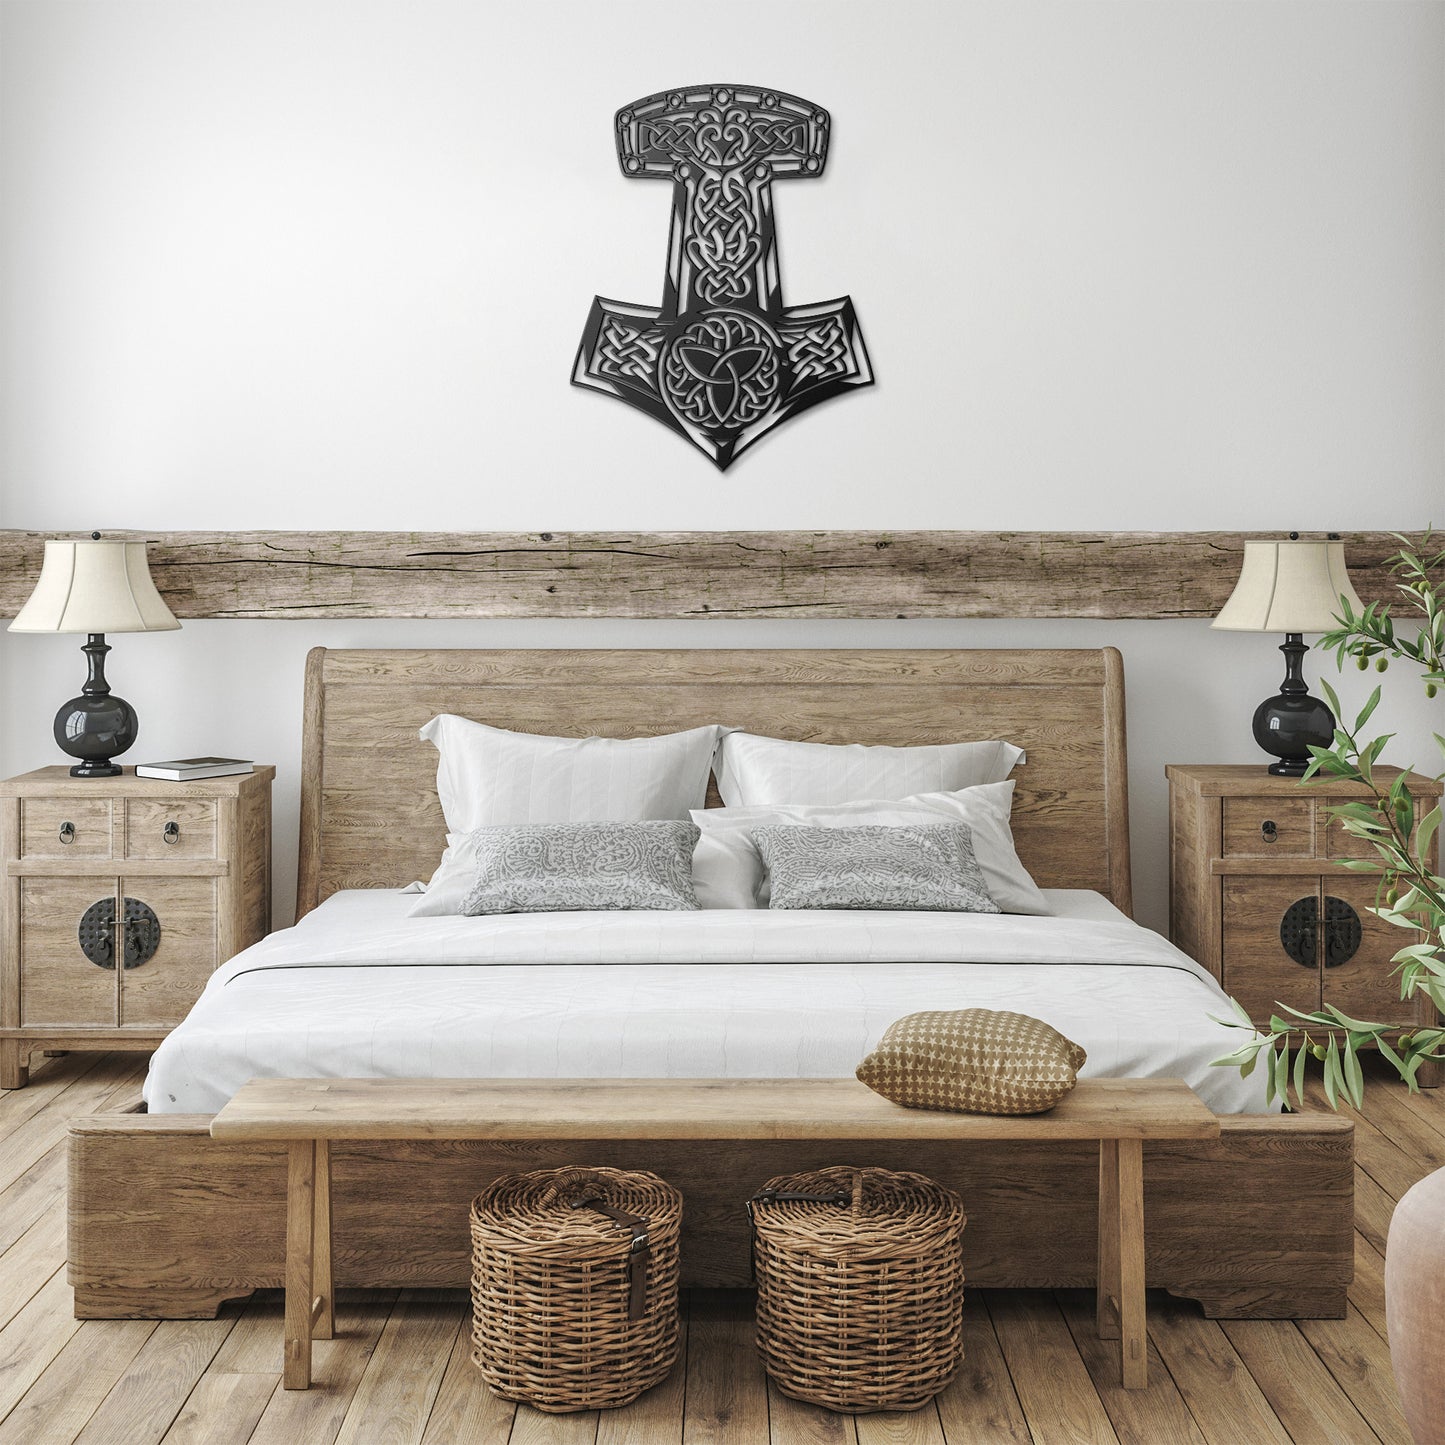 Thor's Hammer Metal Wall Sign